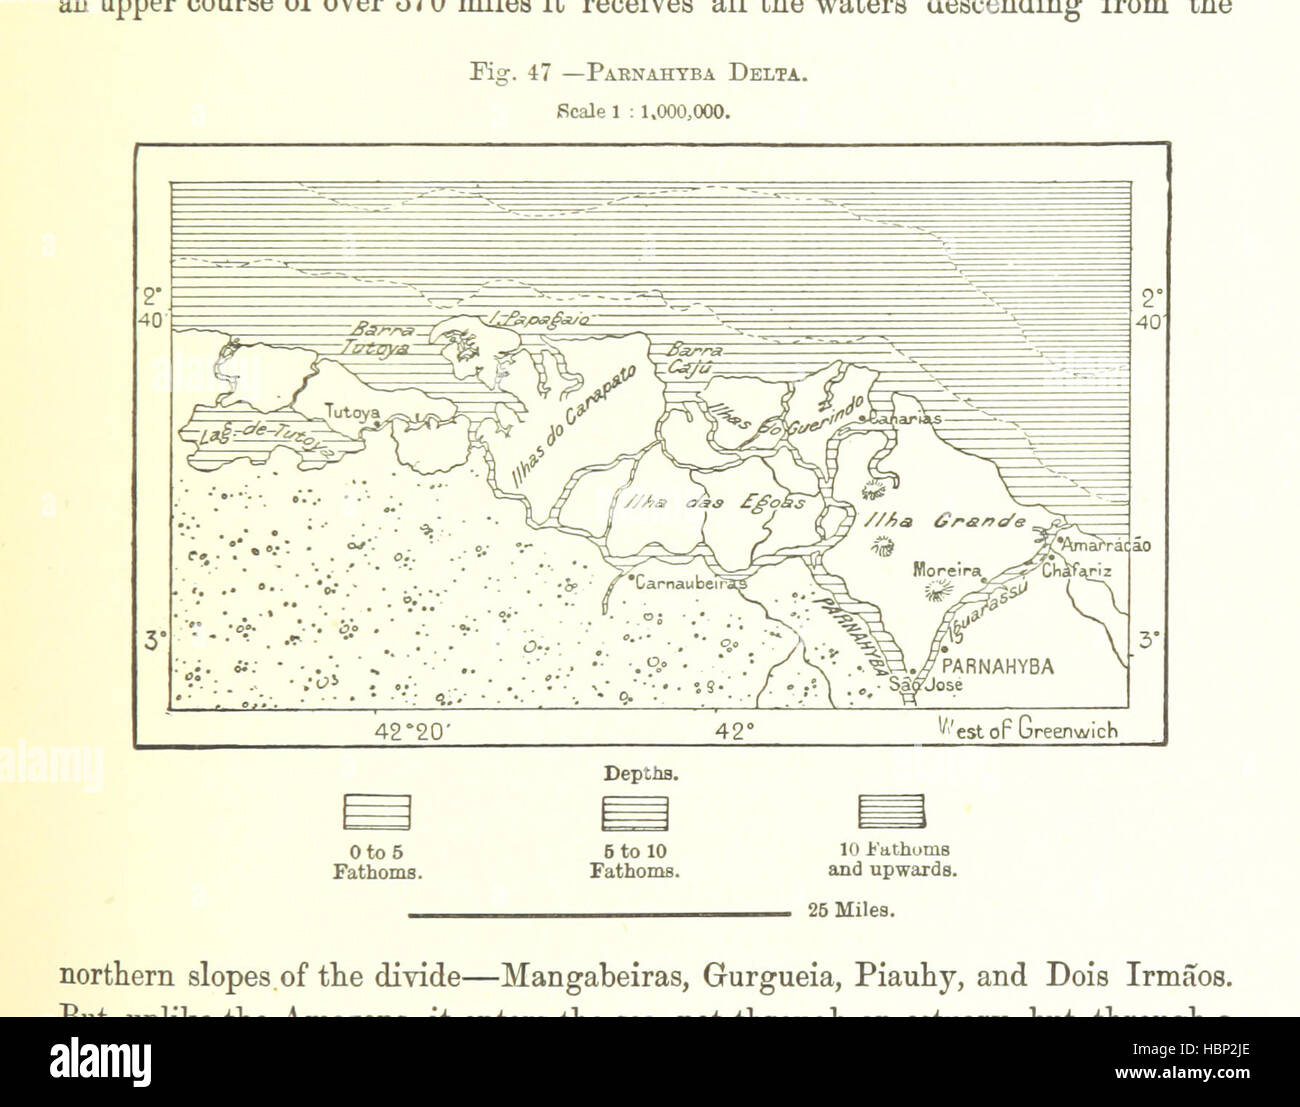 Image taken from page 181 of 'The Earth and its Inhabitants. The European section of the Universal Geography by E. Reclus. Edited by E. G. Ravenstein. Illustrated by ... engravings and maps' Image taken from page 181 of 'The Earth and its Stock Photo